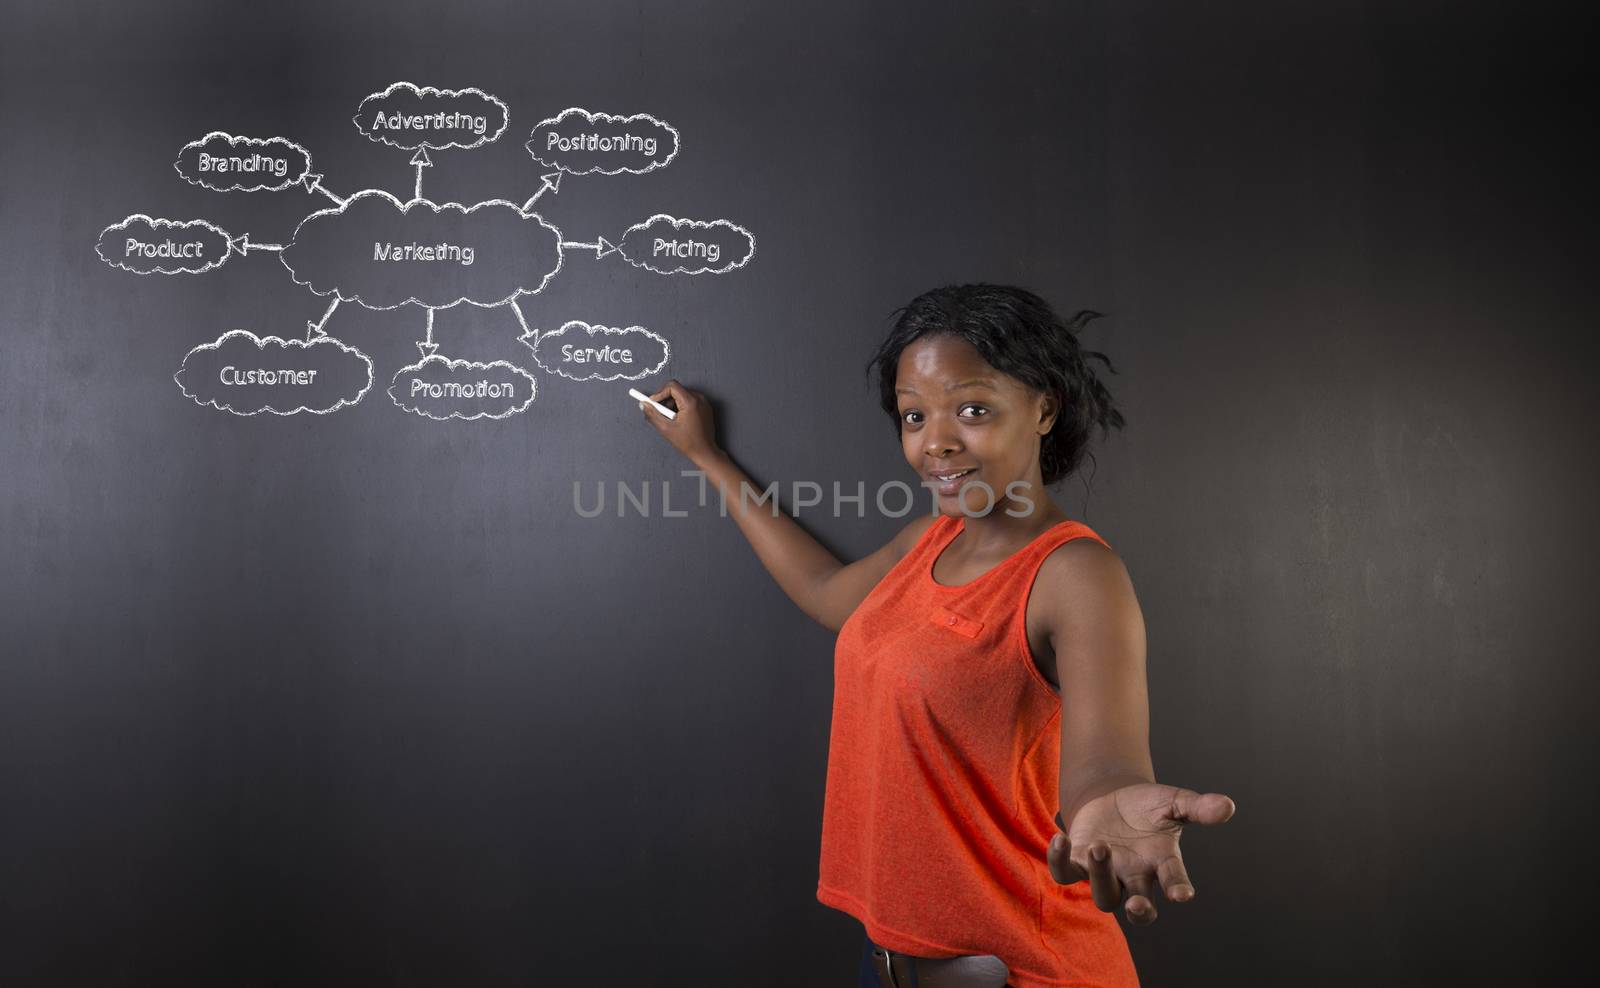 South African or African American woman teacher or student against blackboard marketing diagram by alistaircotton